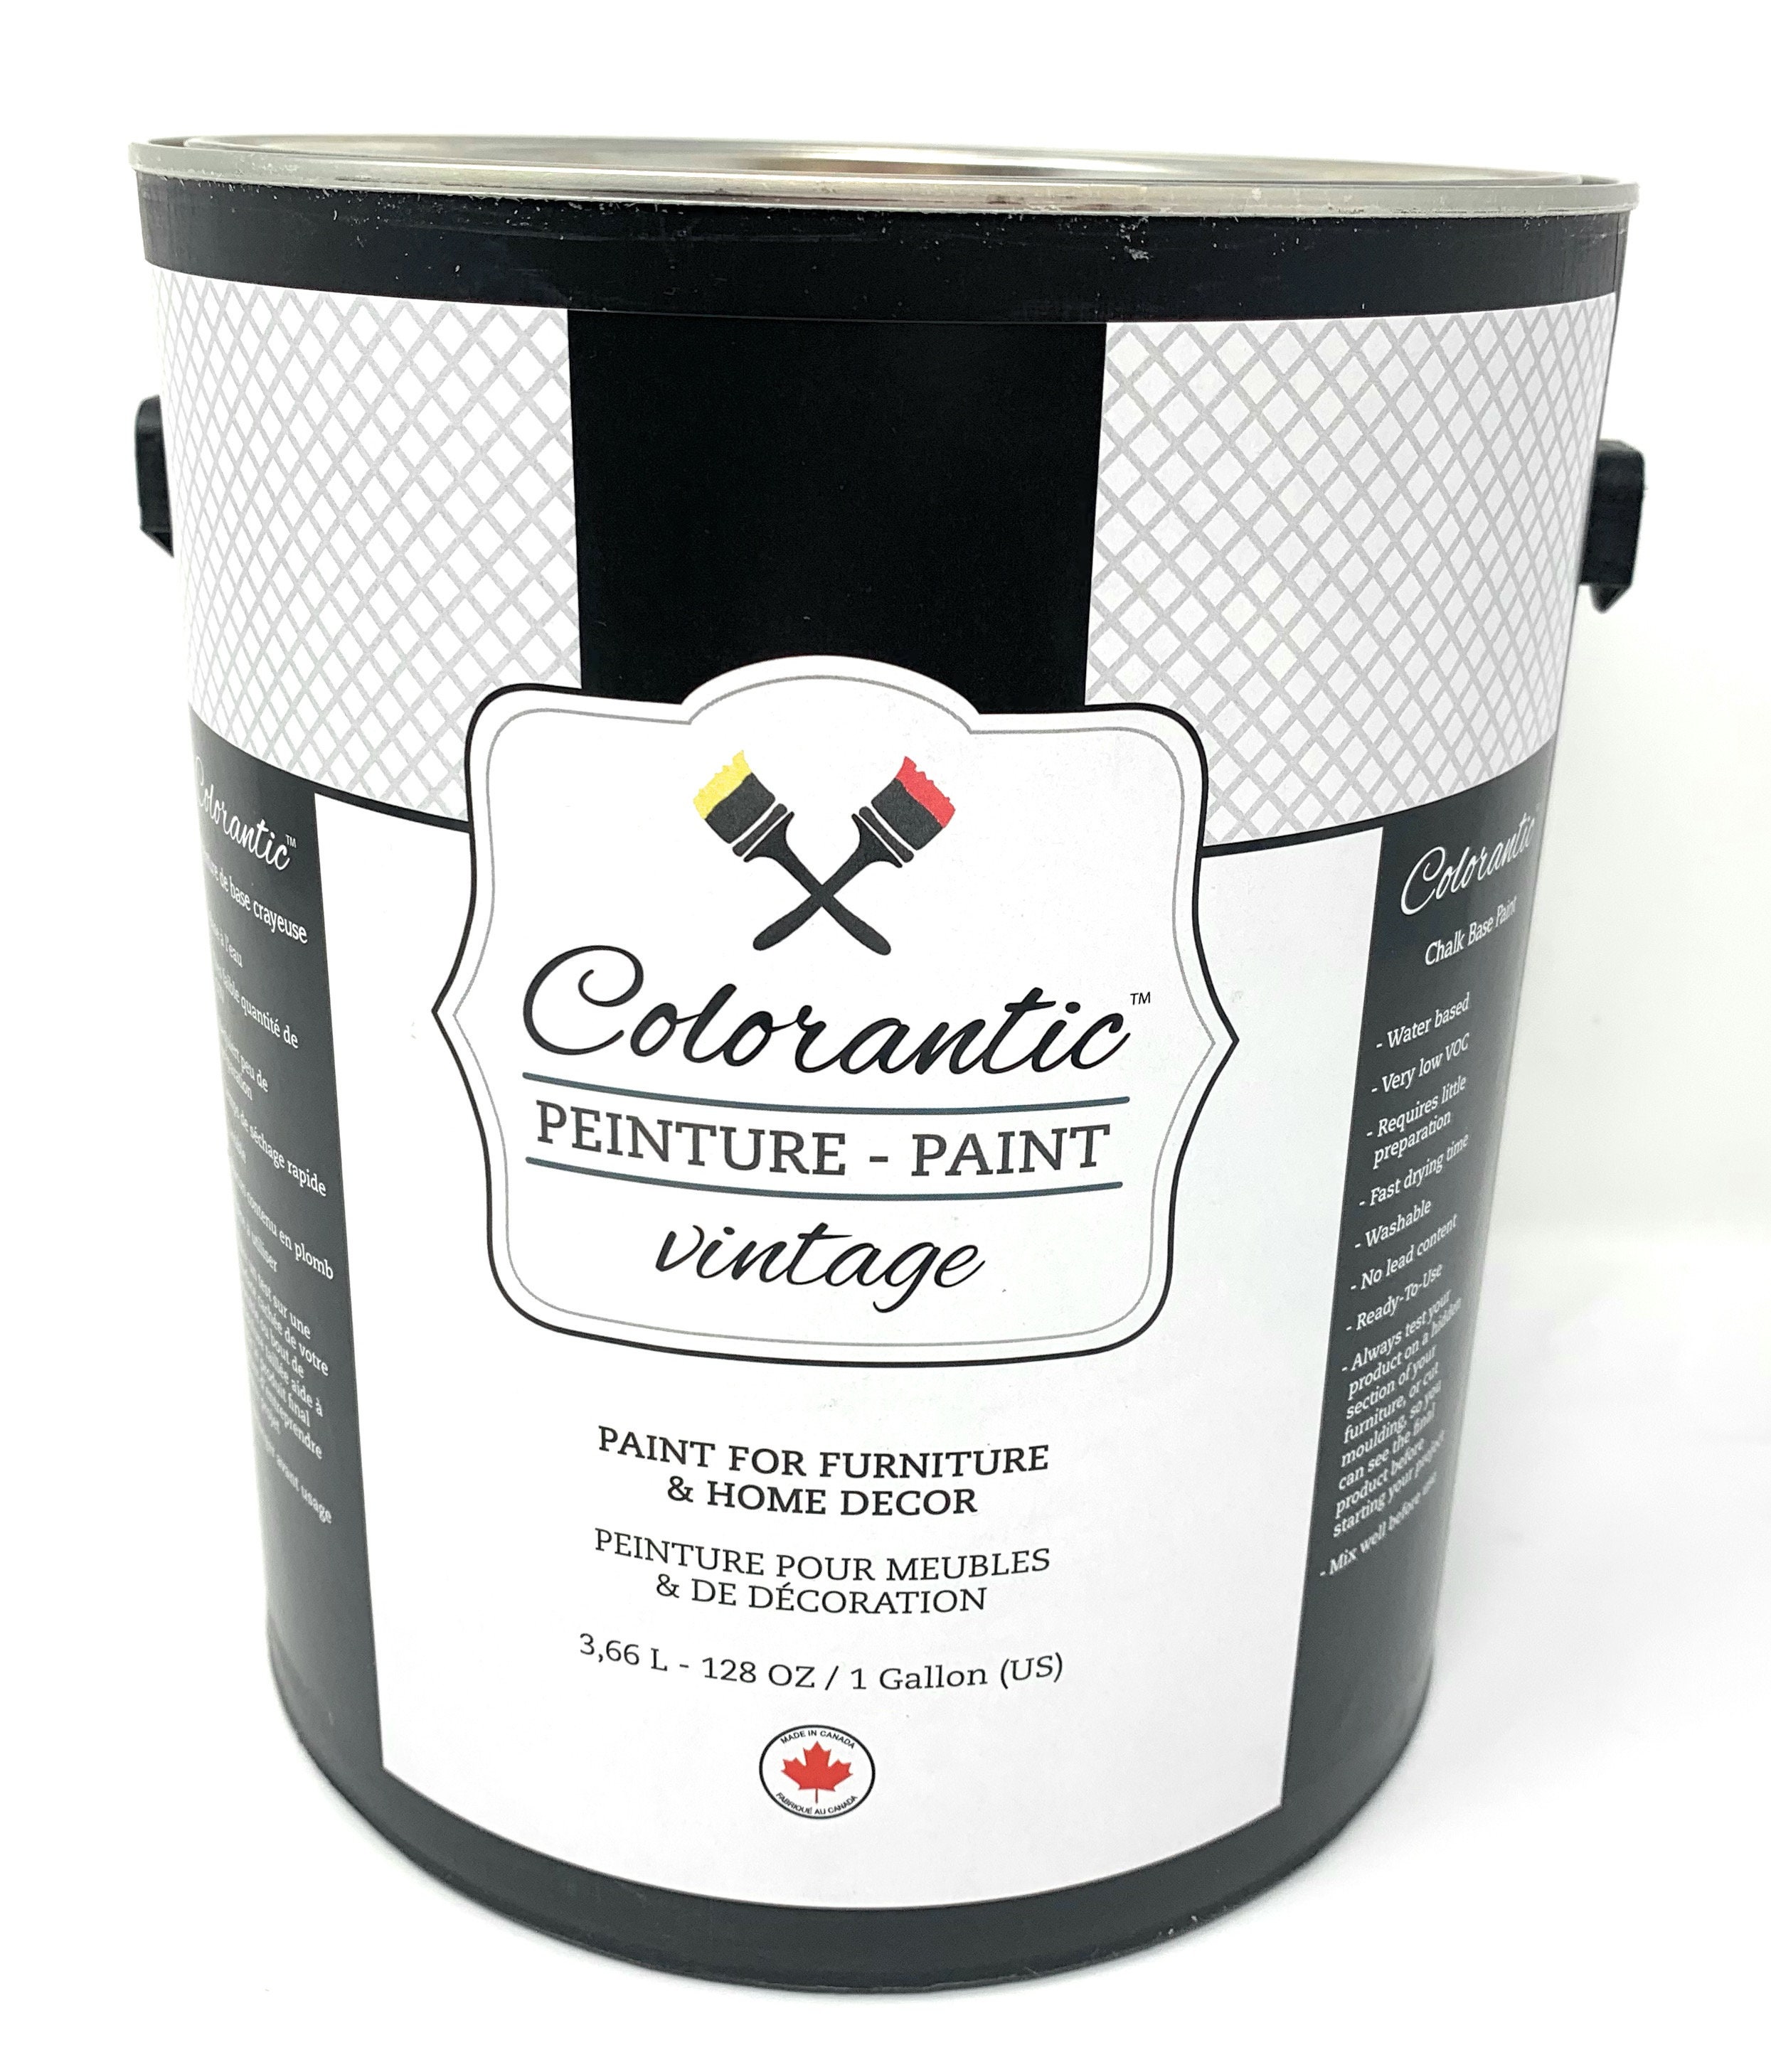 Colorantic  EMERALD Chalk Based Paint for Furniture DIY, Cabinet